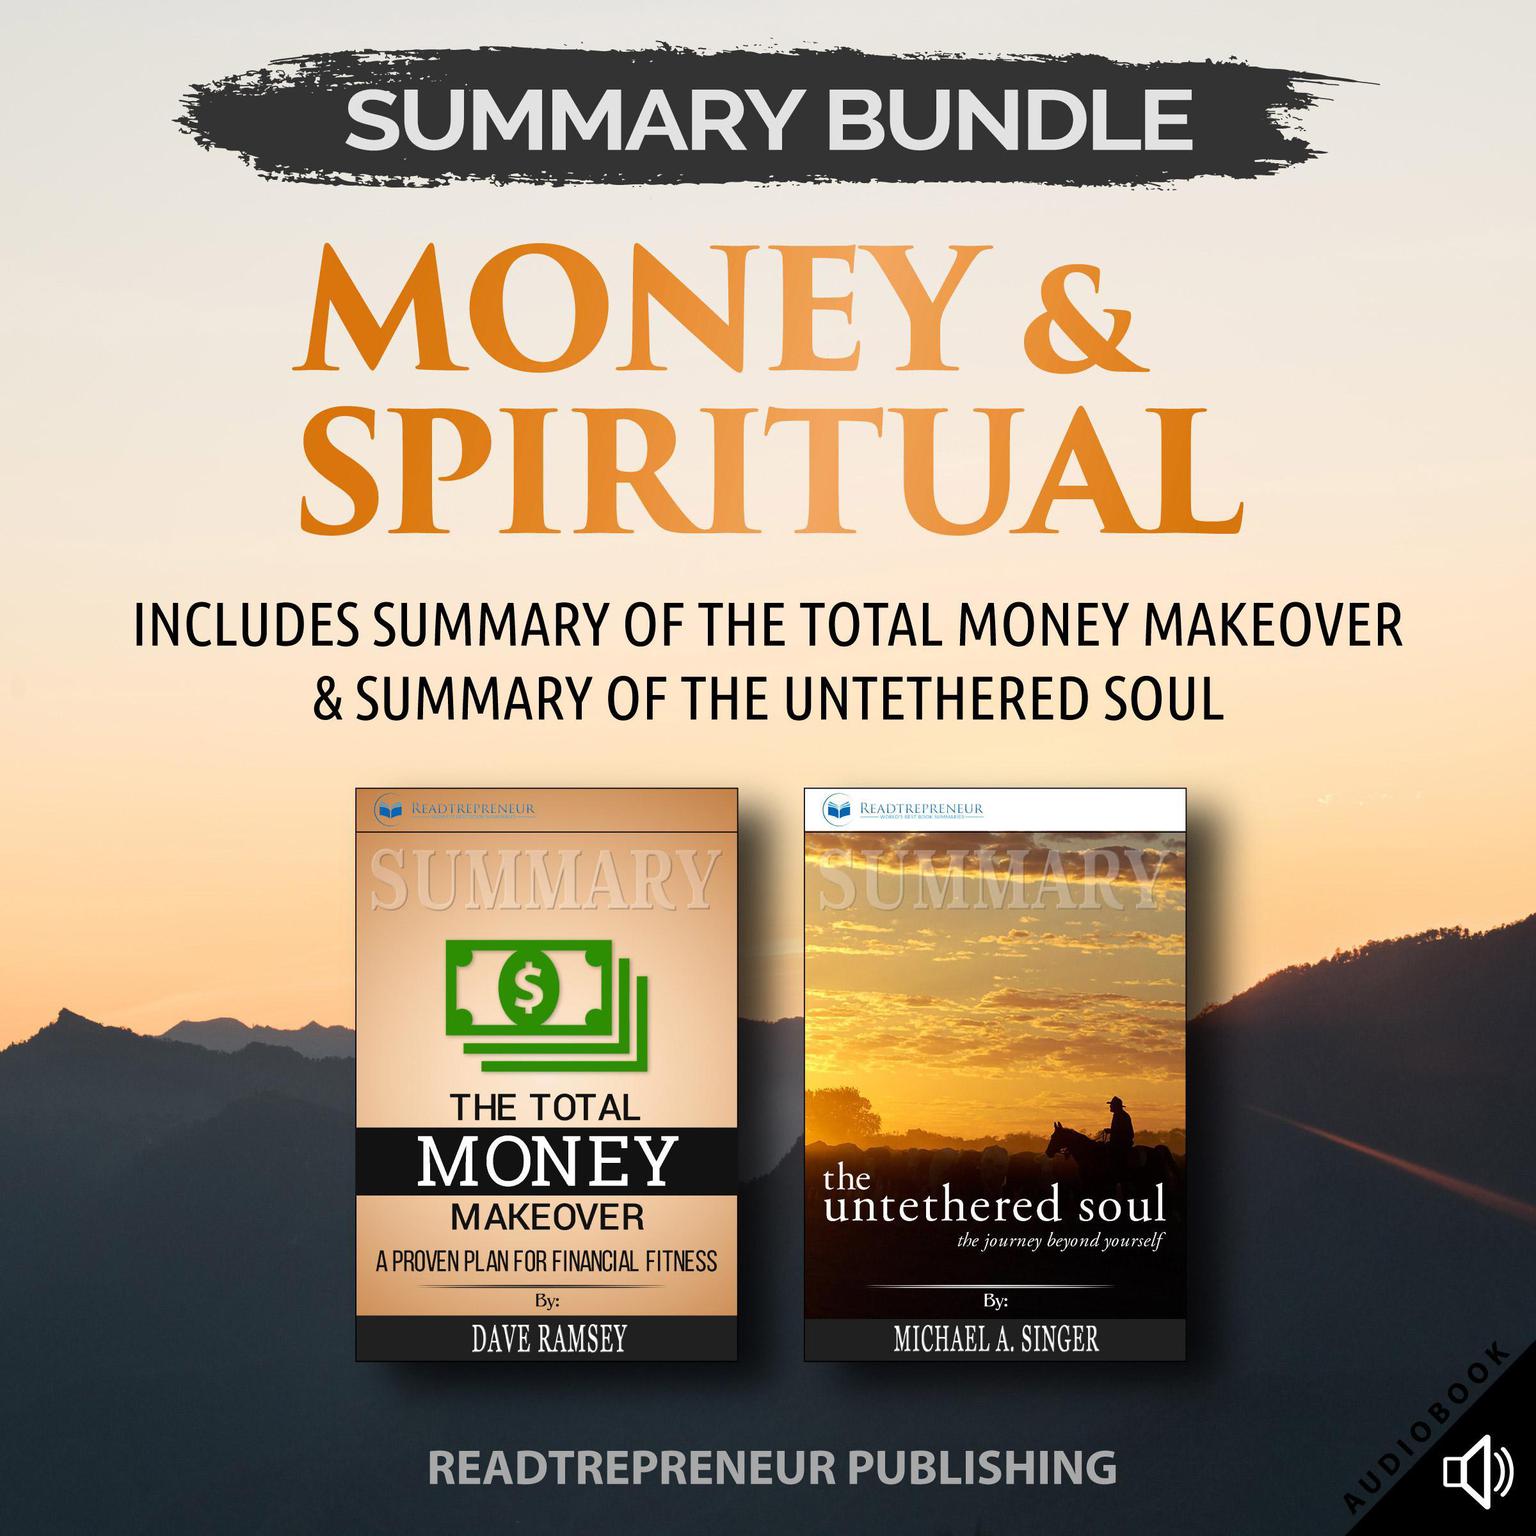 Summary Bundle: Money & Spiritual: Readtrepreneur Publishing: Includes Summary of The Total Money Makeover & Summary of The Untethered Soul Audiobook, by Readtrepreneur Publishing